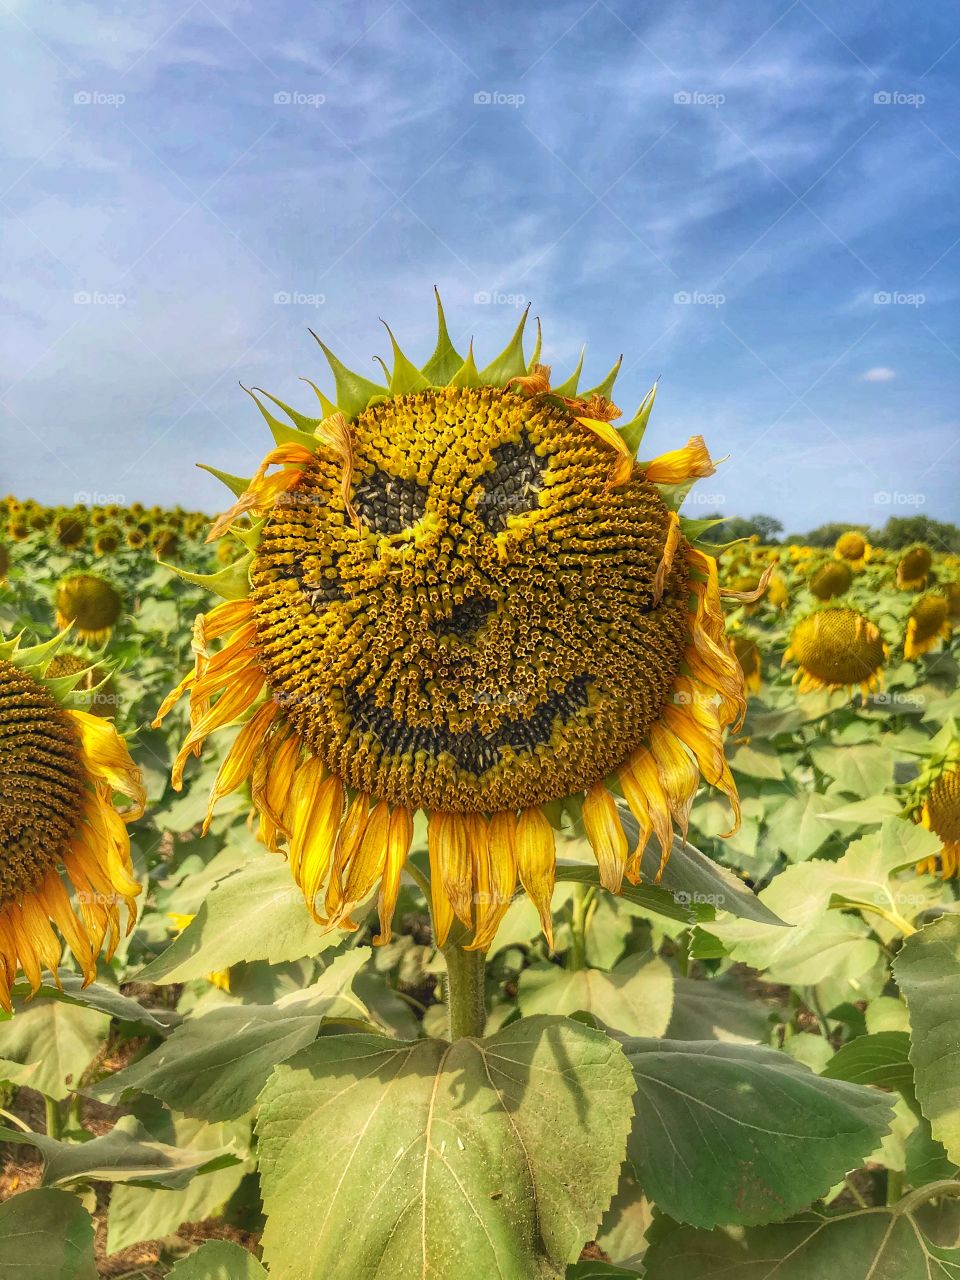 Sunflowers with a smiley face full purpose faze 